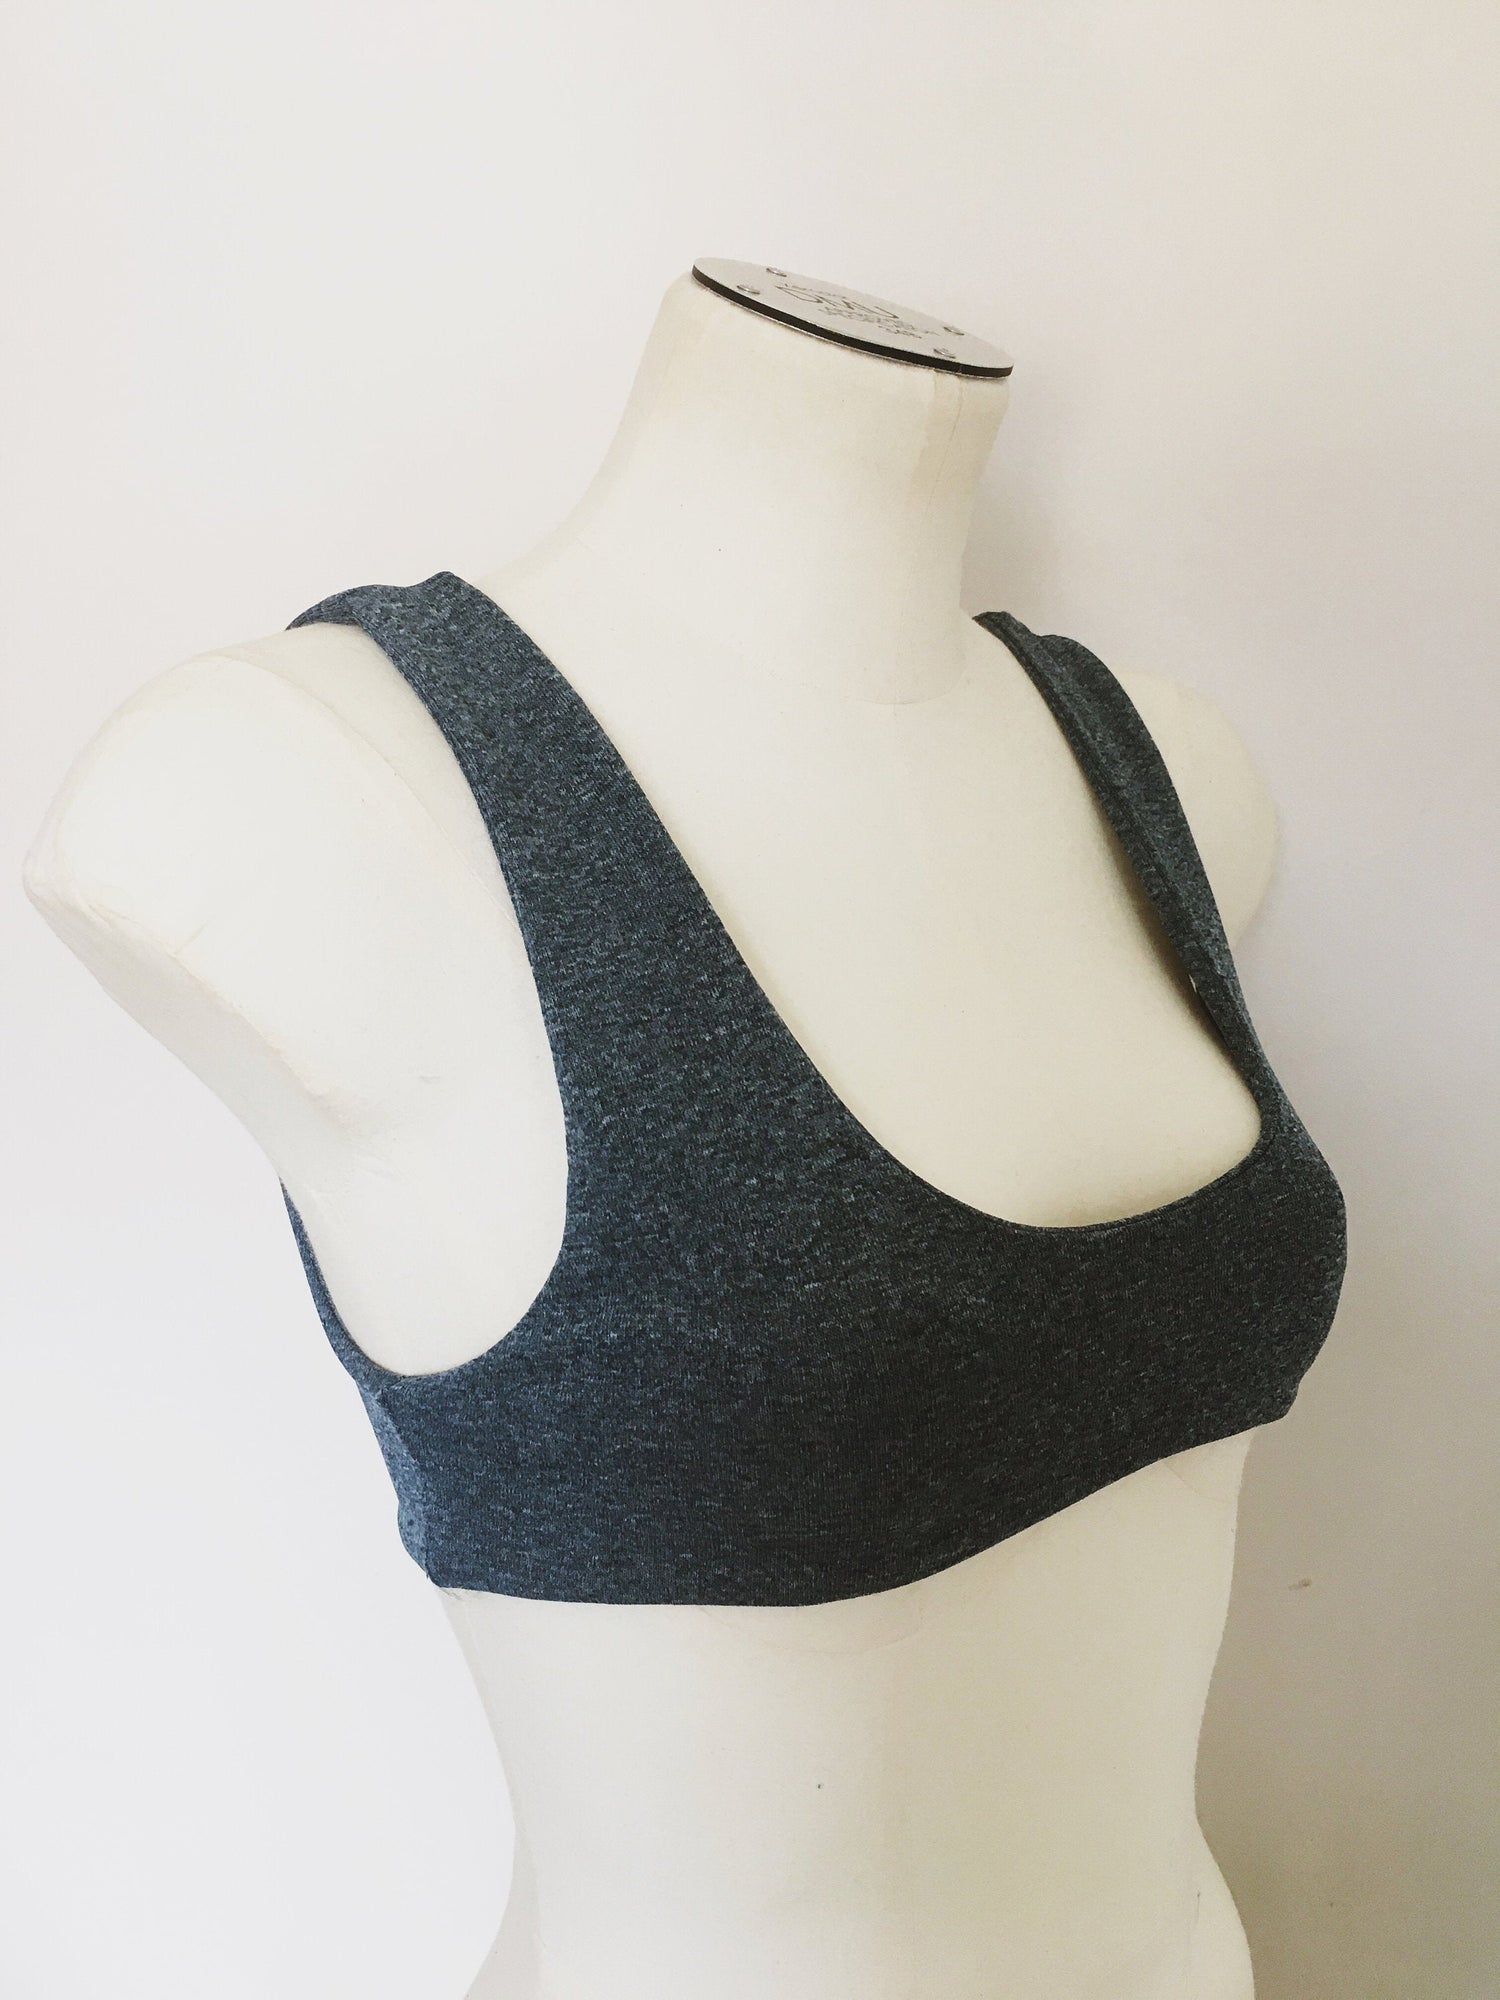 Reversible Sport Bra Top Sewing Pattern, 8 Sizes XS-4XL, Instant Download